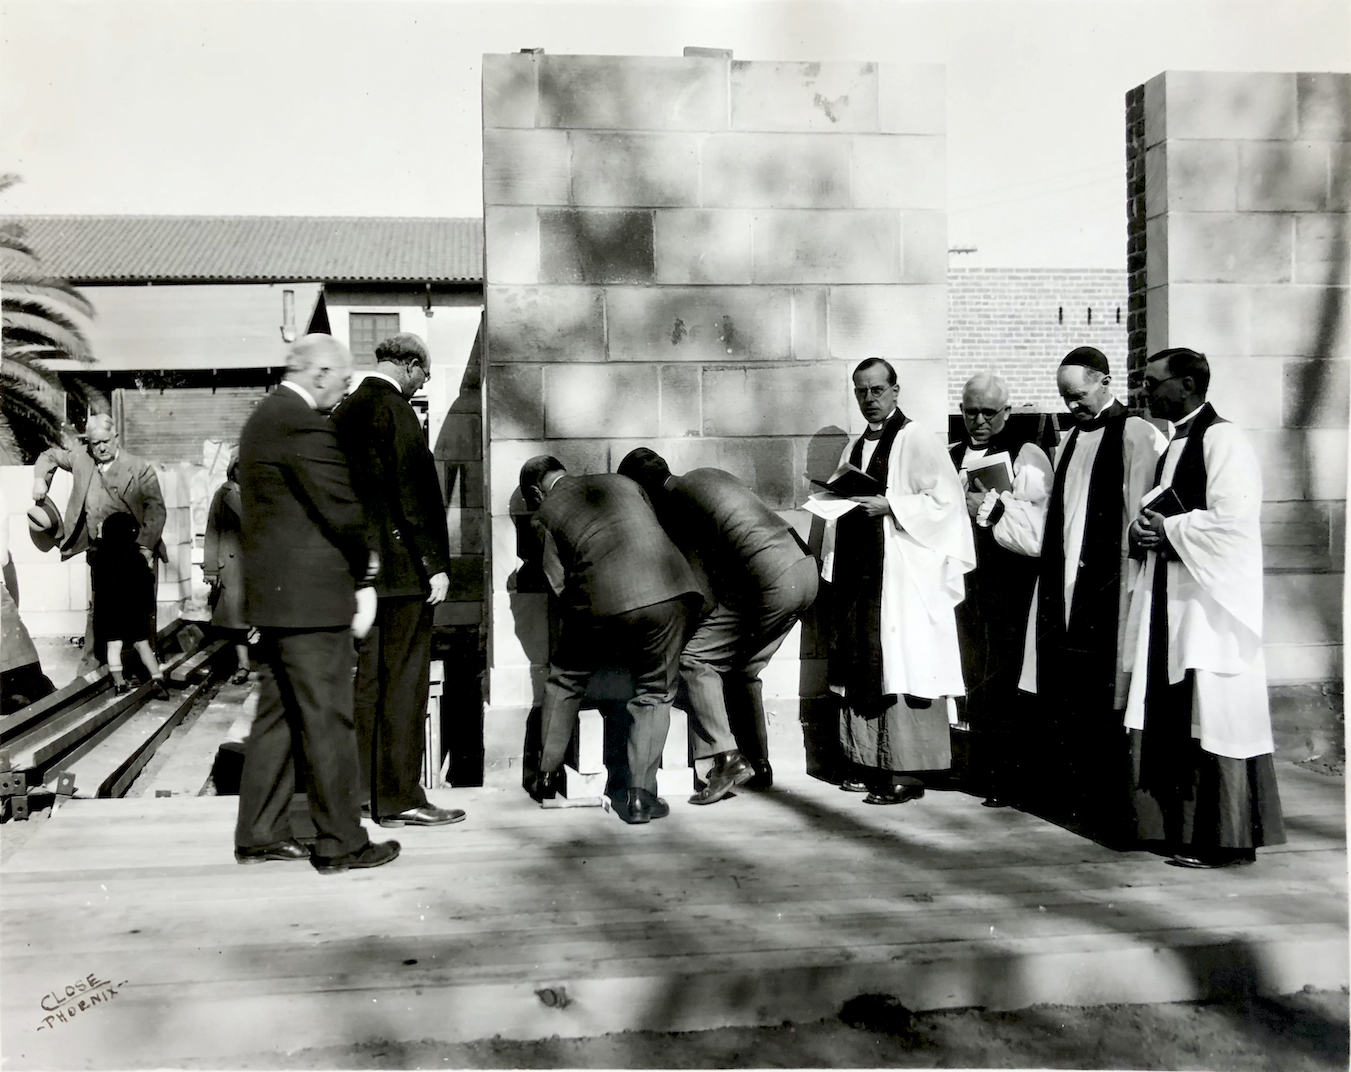 https://trinitycathedral.com/wp-content/uploads/2021/12/4-Laying-of-cornerstone-Atwood-Hall-web.png